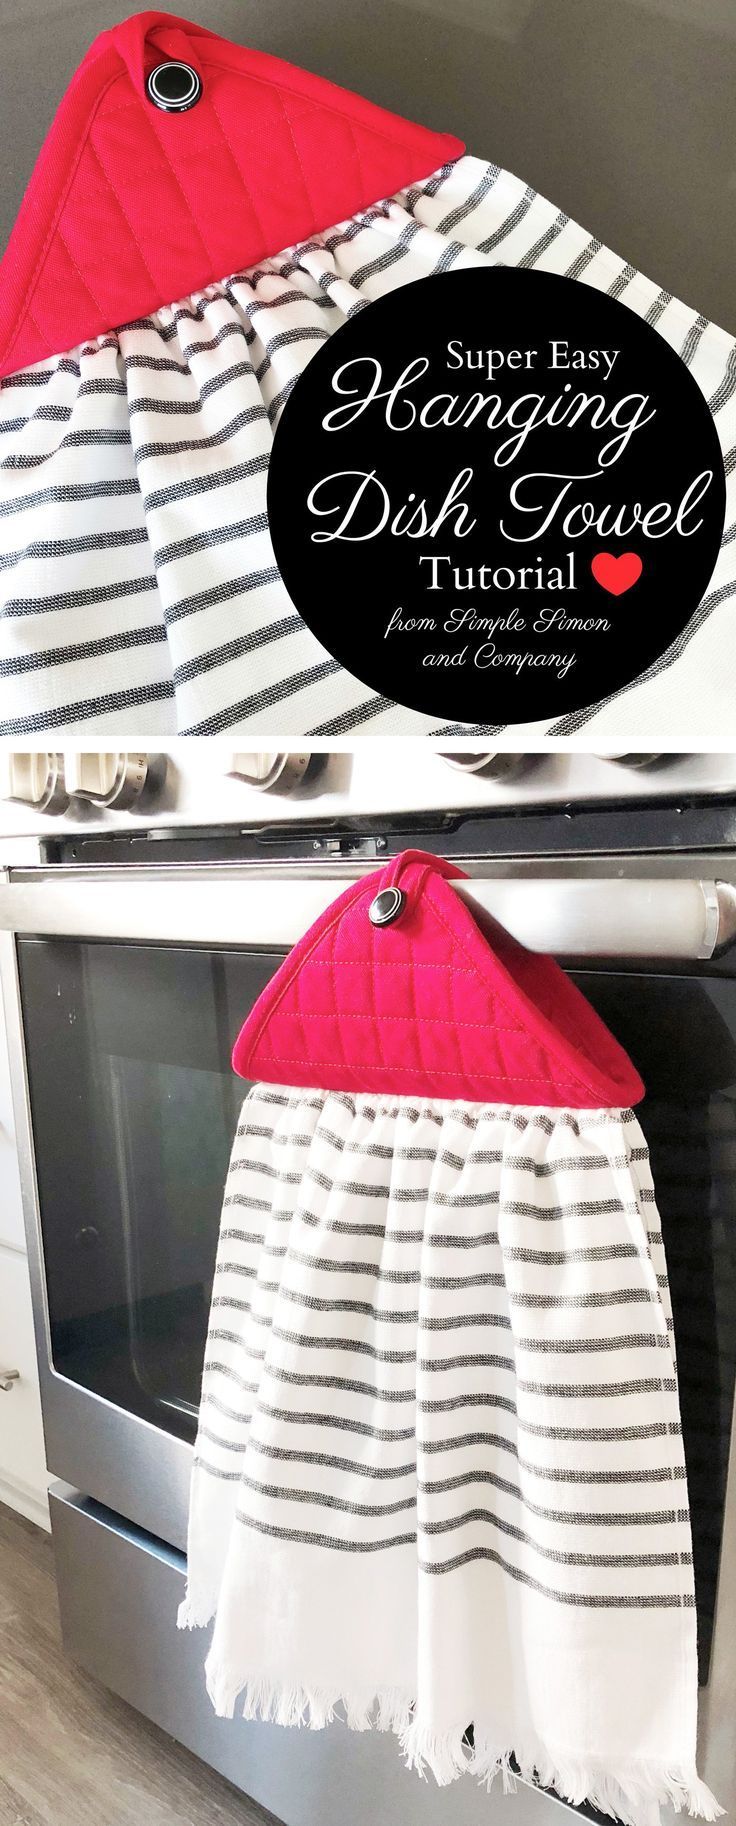 13 diy projects Sewing style ideas